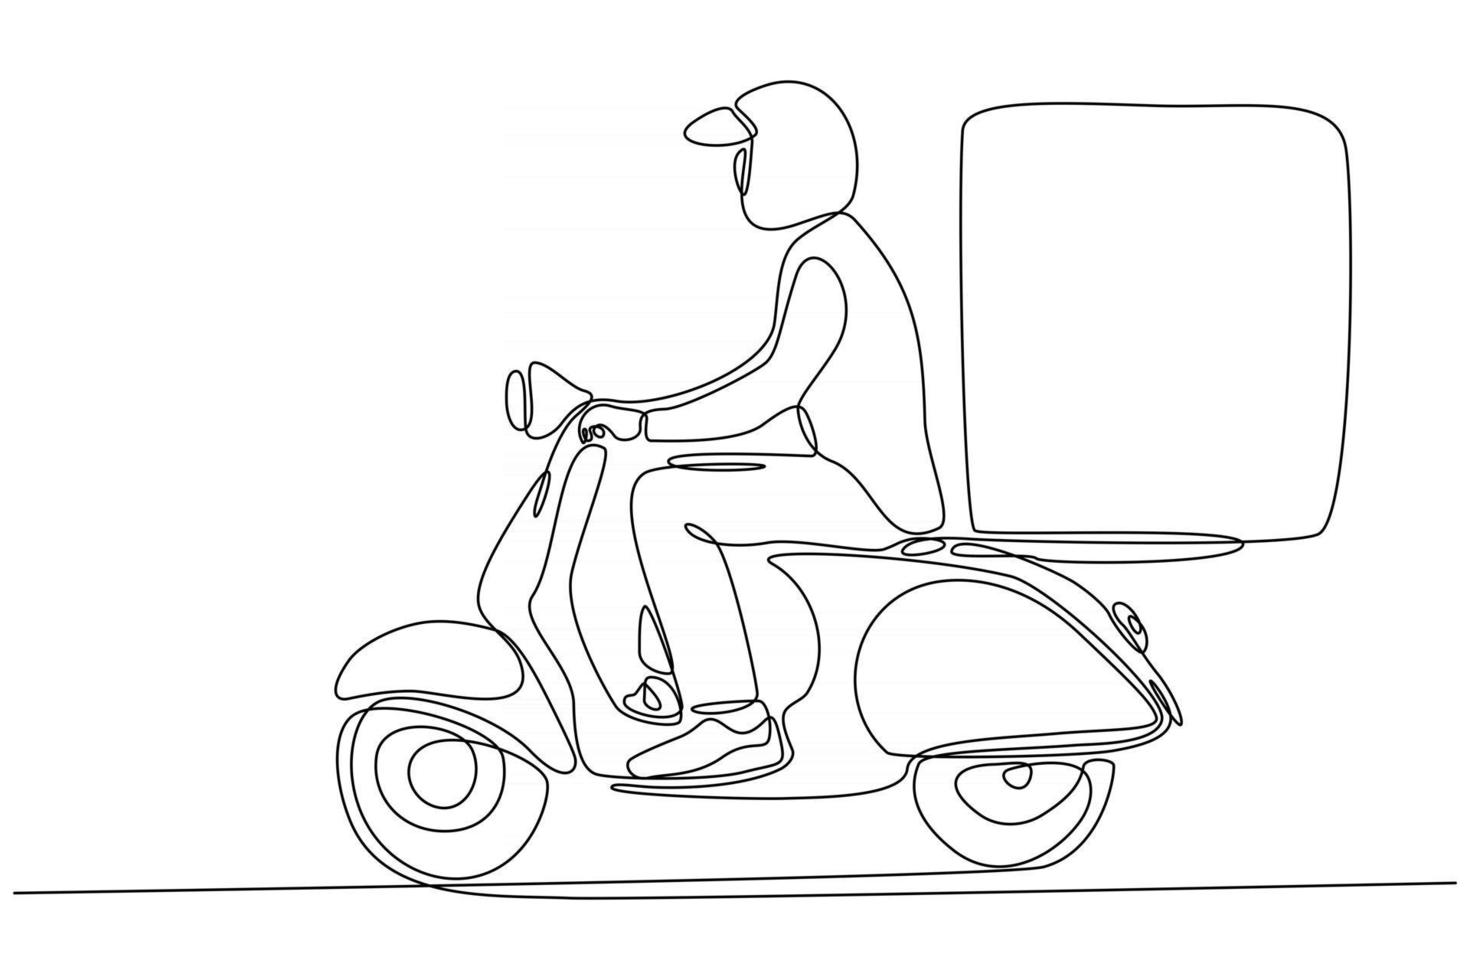 Continuous line drawing of courier delivering orders on motorbikes vector illustration